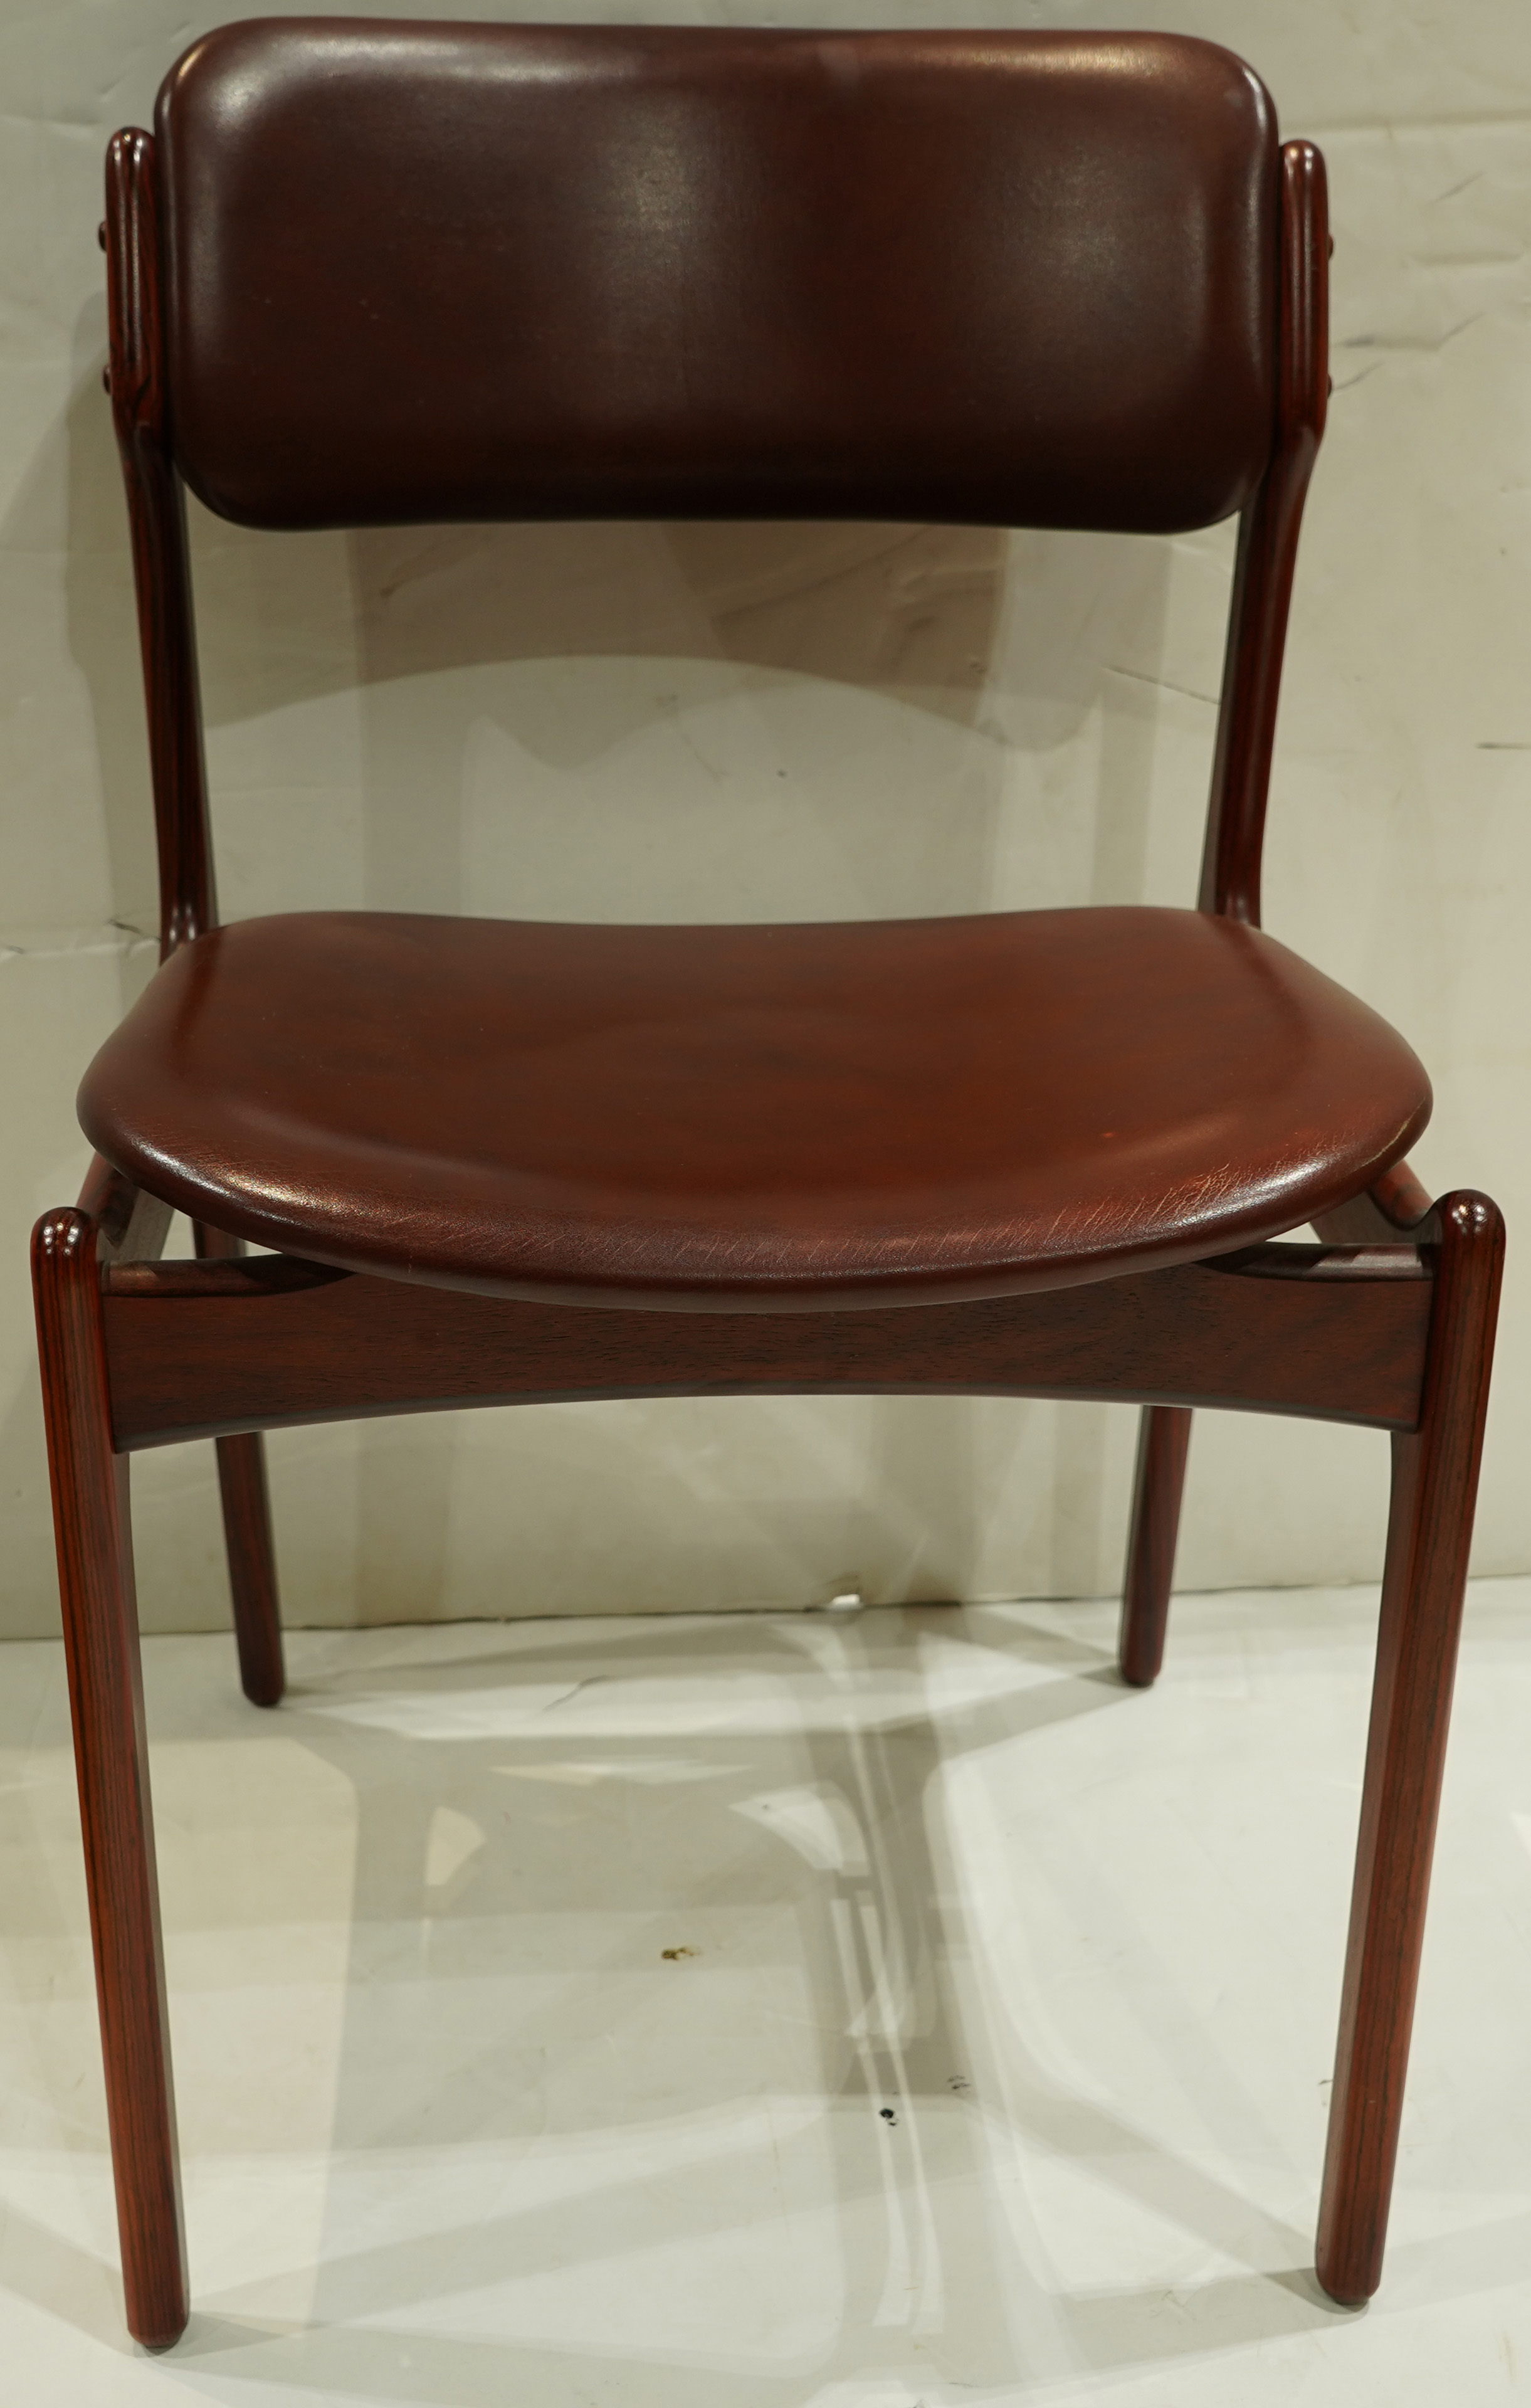 A group of Erik Buch Danish Modern rosewood chairs, model 49 - Image 3 of 5